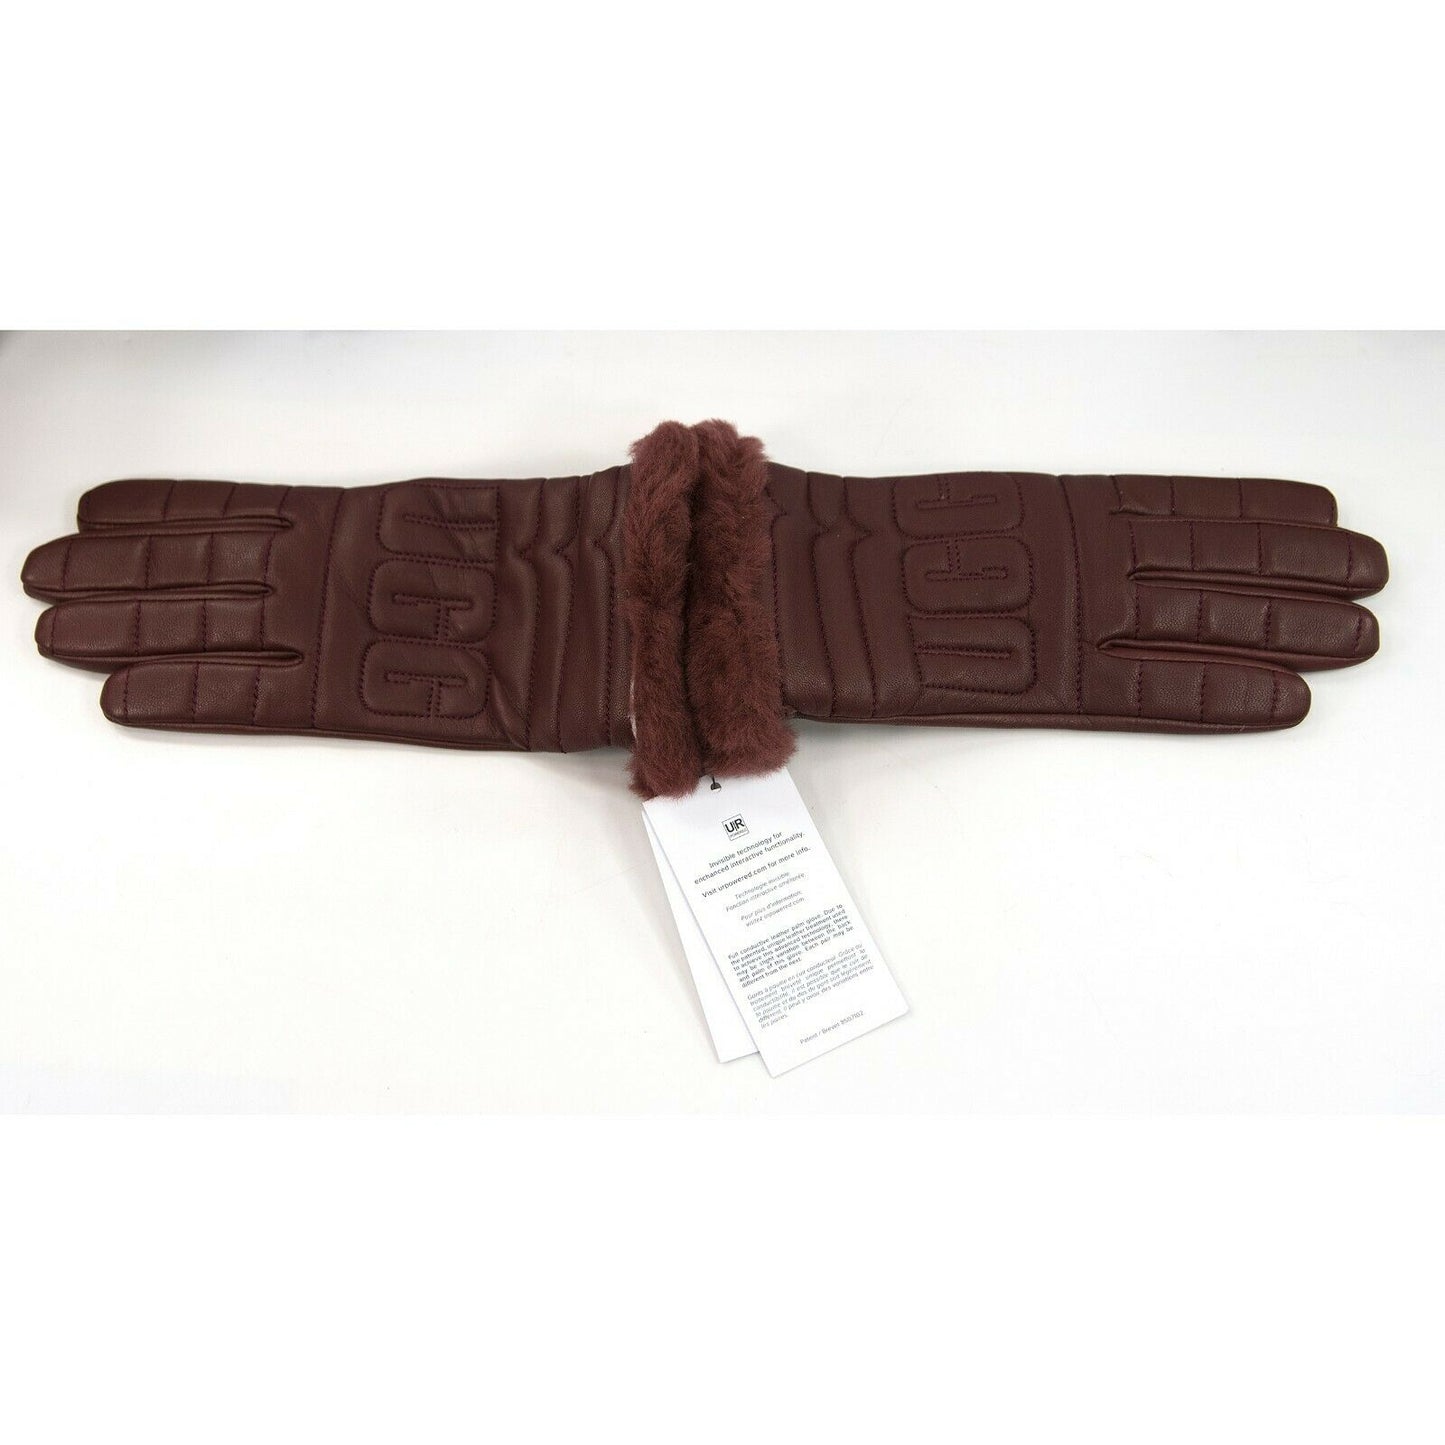 Ugg Burgundy Quilted Leather Conductive Tech Palm Shearling Fur Gloves Large